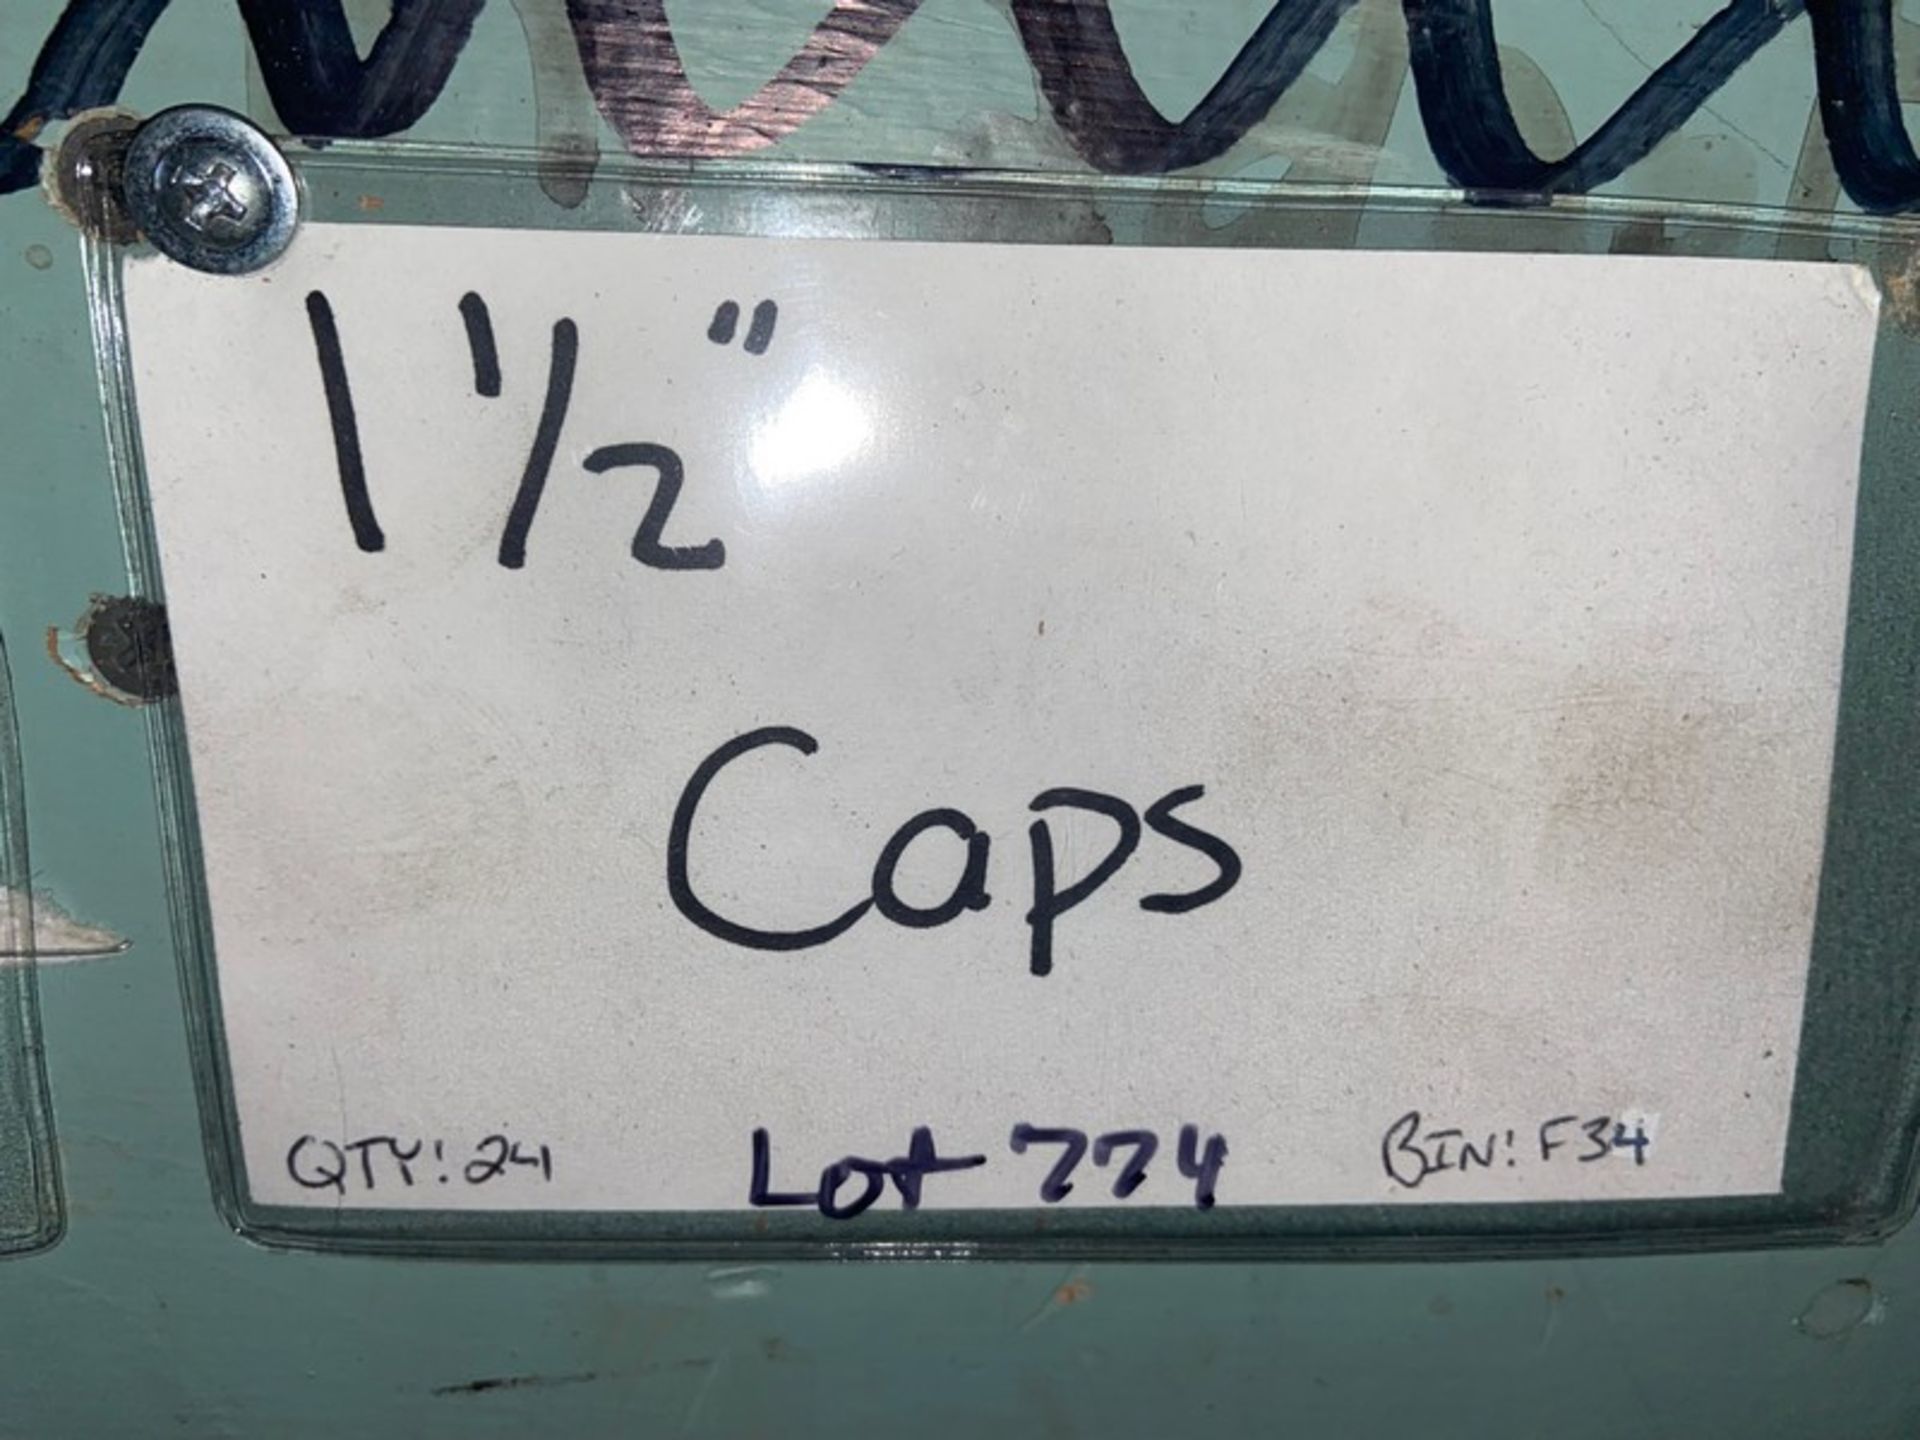 (24) 1 1/2” Caps (Bin:F34)(LOCATED IN MONROEVILLE, PA) - Image 2 of 2